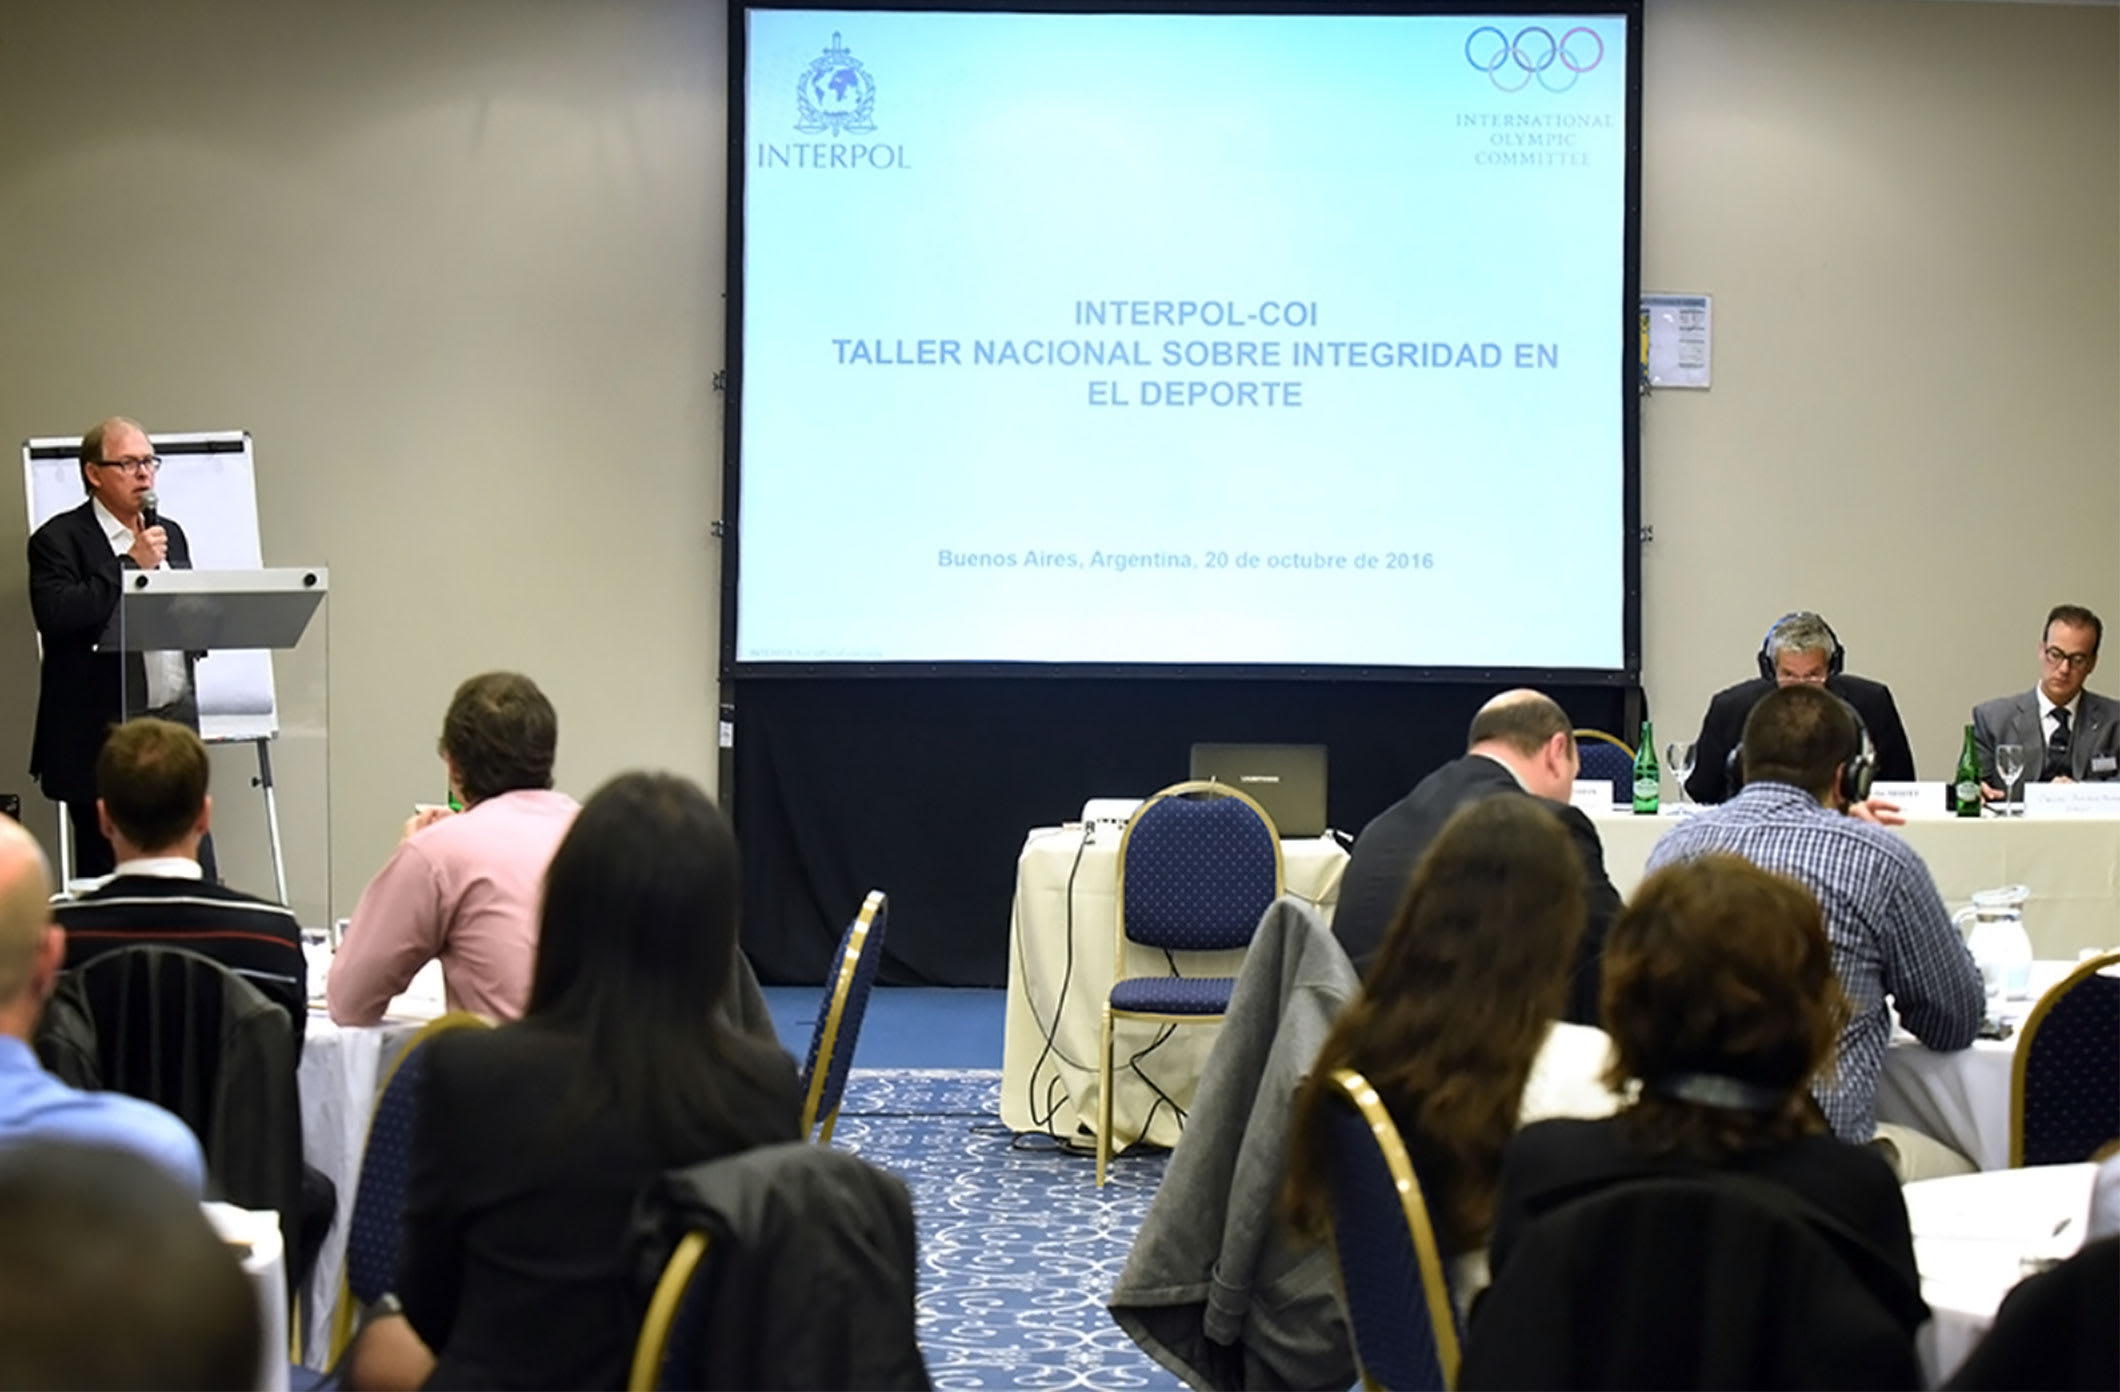 IOC and INTERPOL host national Integrity Training in Buenos Aires